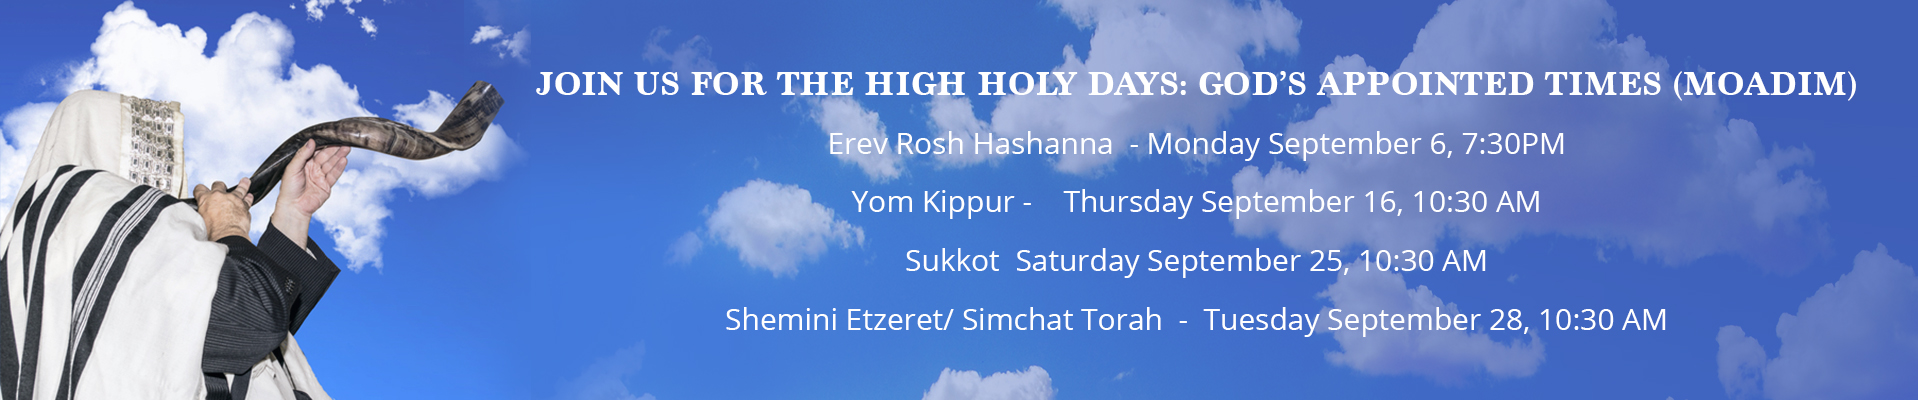 JOIN US FOR THE HIGH HOLY DAYS: GOD'S APPOINTED TIMES (MOADIM)